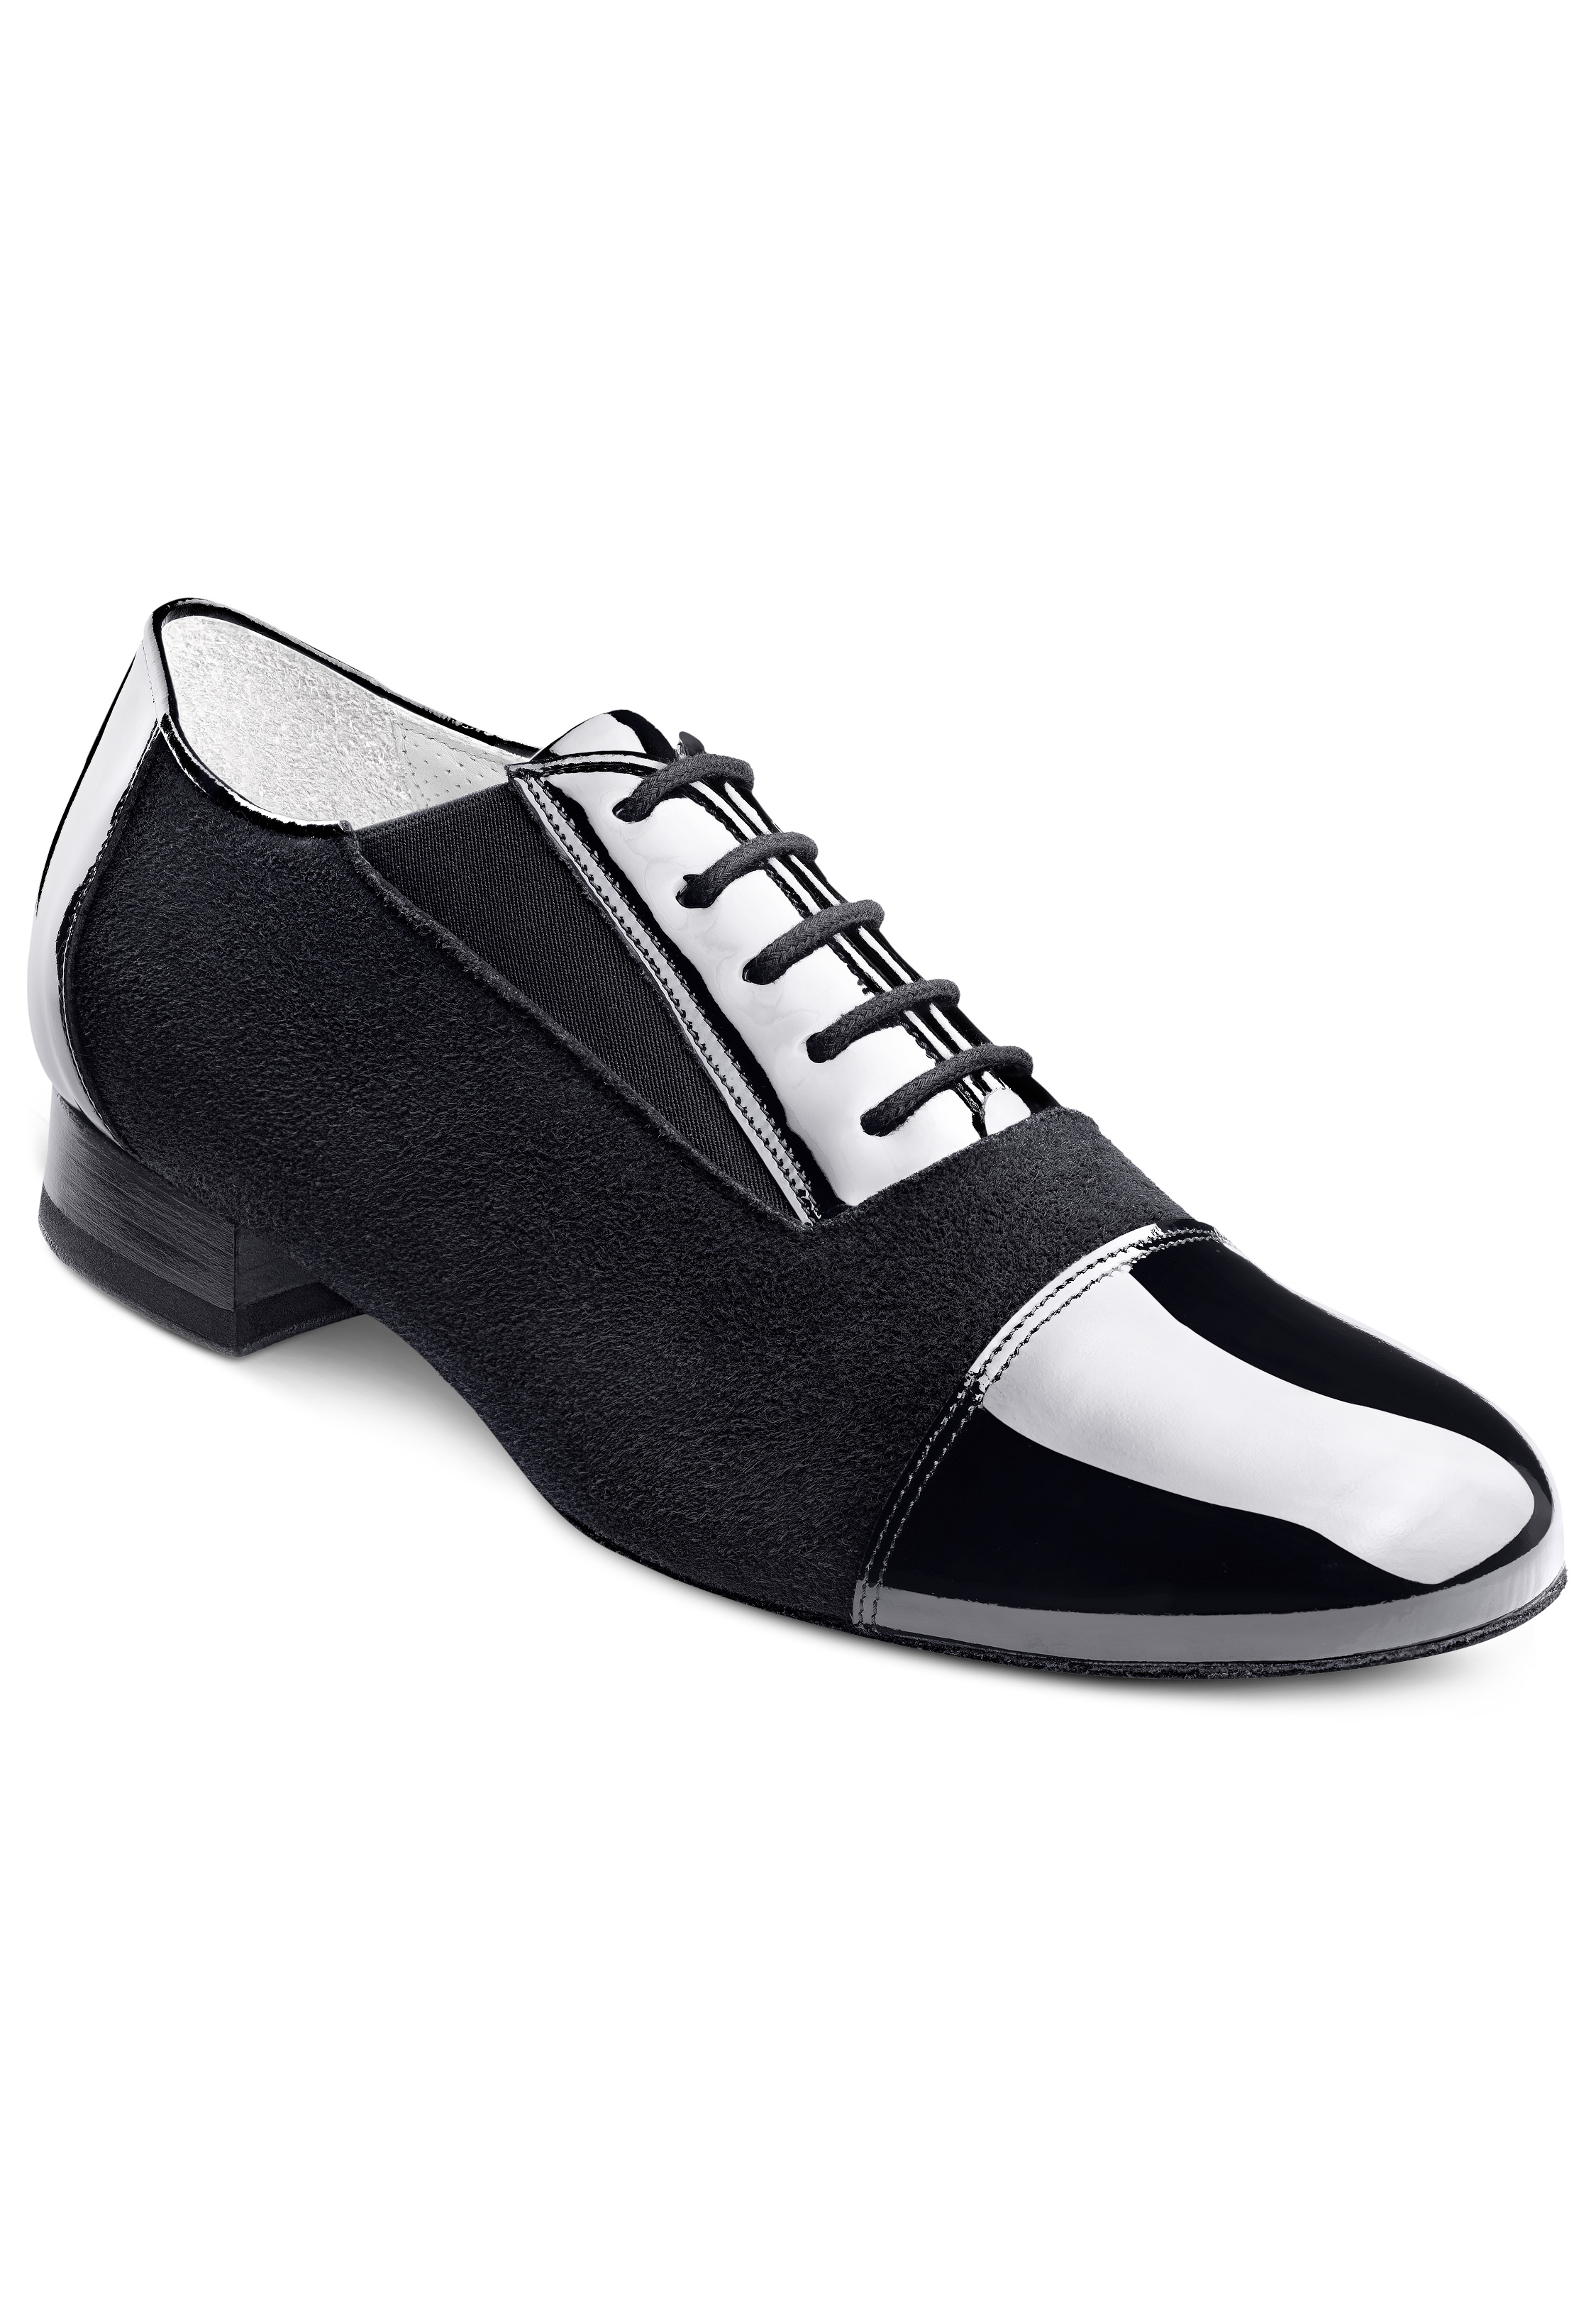 Amazon.com: Shoes Boys Modern Dance Shoes Prom Ballroom Latin Dance Shoes  Solid Color Lace Up Leather Shoes (Black, 26) : Clothing, Shoes & Jewelry